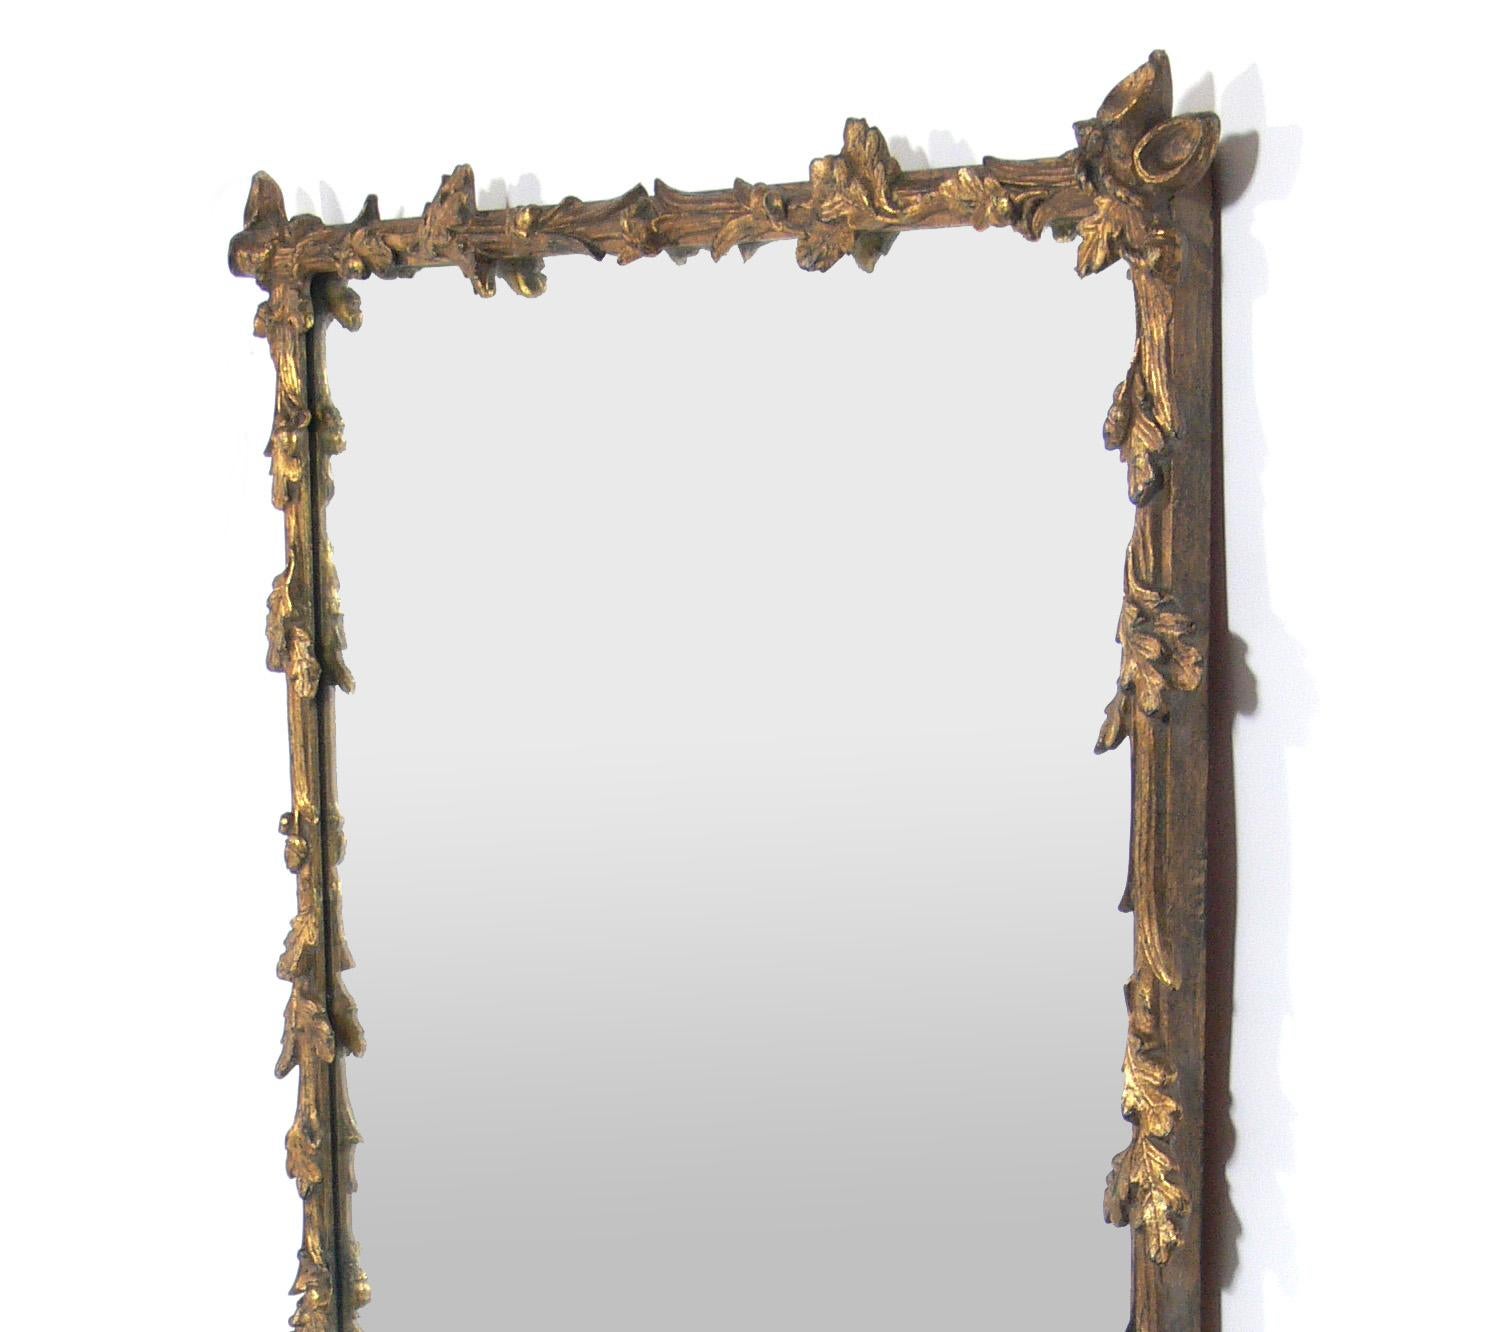 Gilt oak leaf branches mirror, American, circa 1940s. Wonderful patina to both gilt frame and original mirrored glass. It measures an impressive 56.5